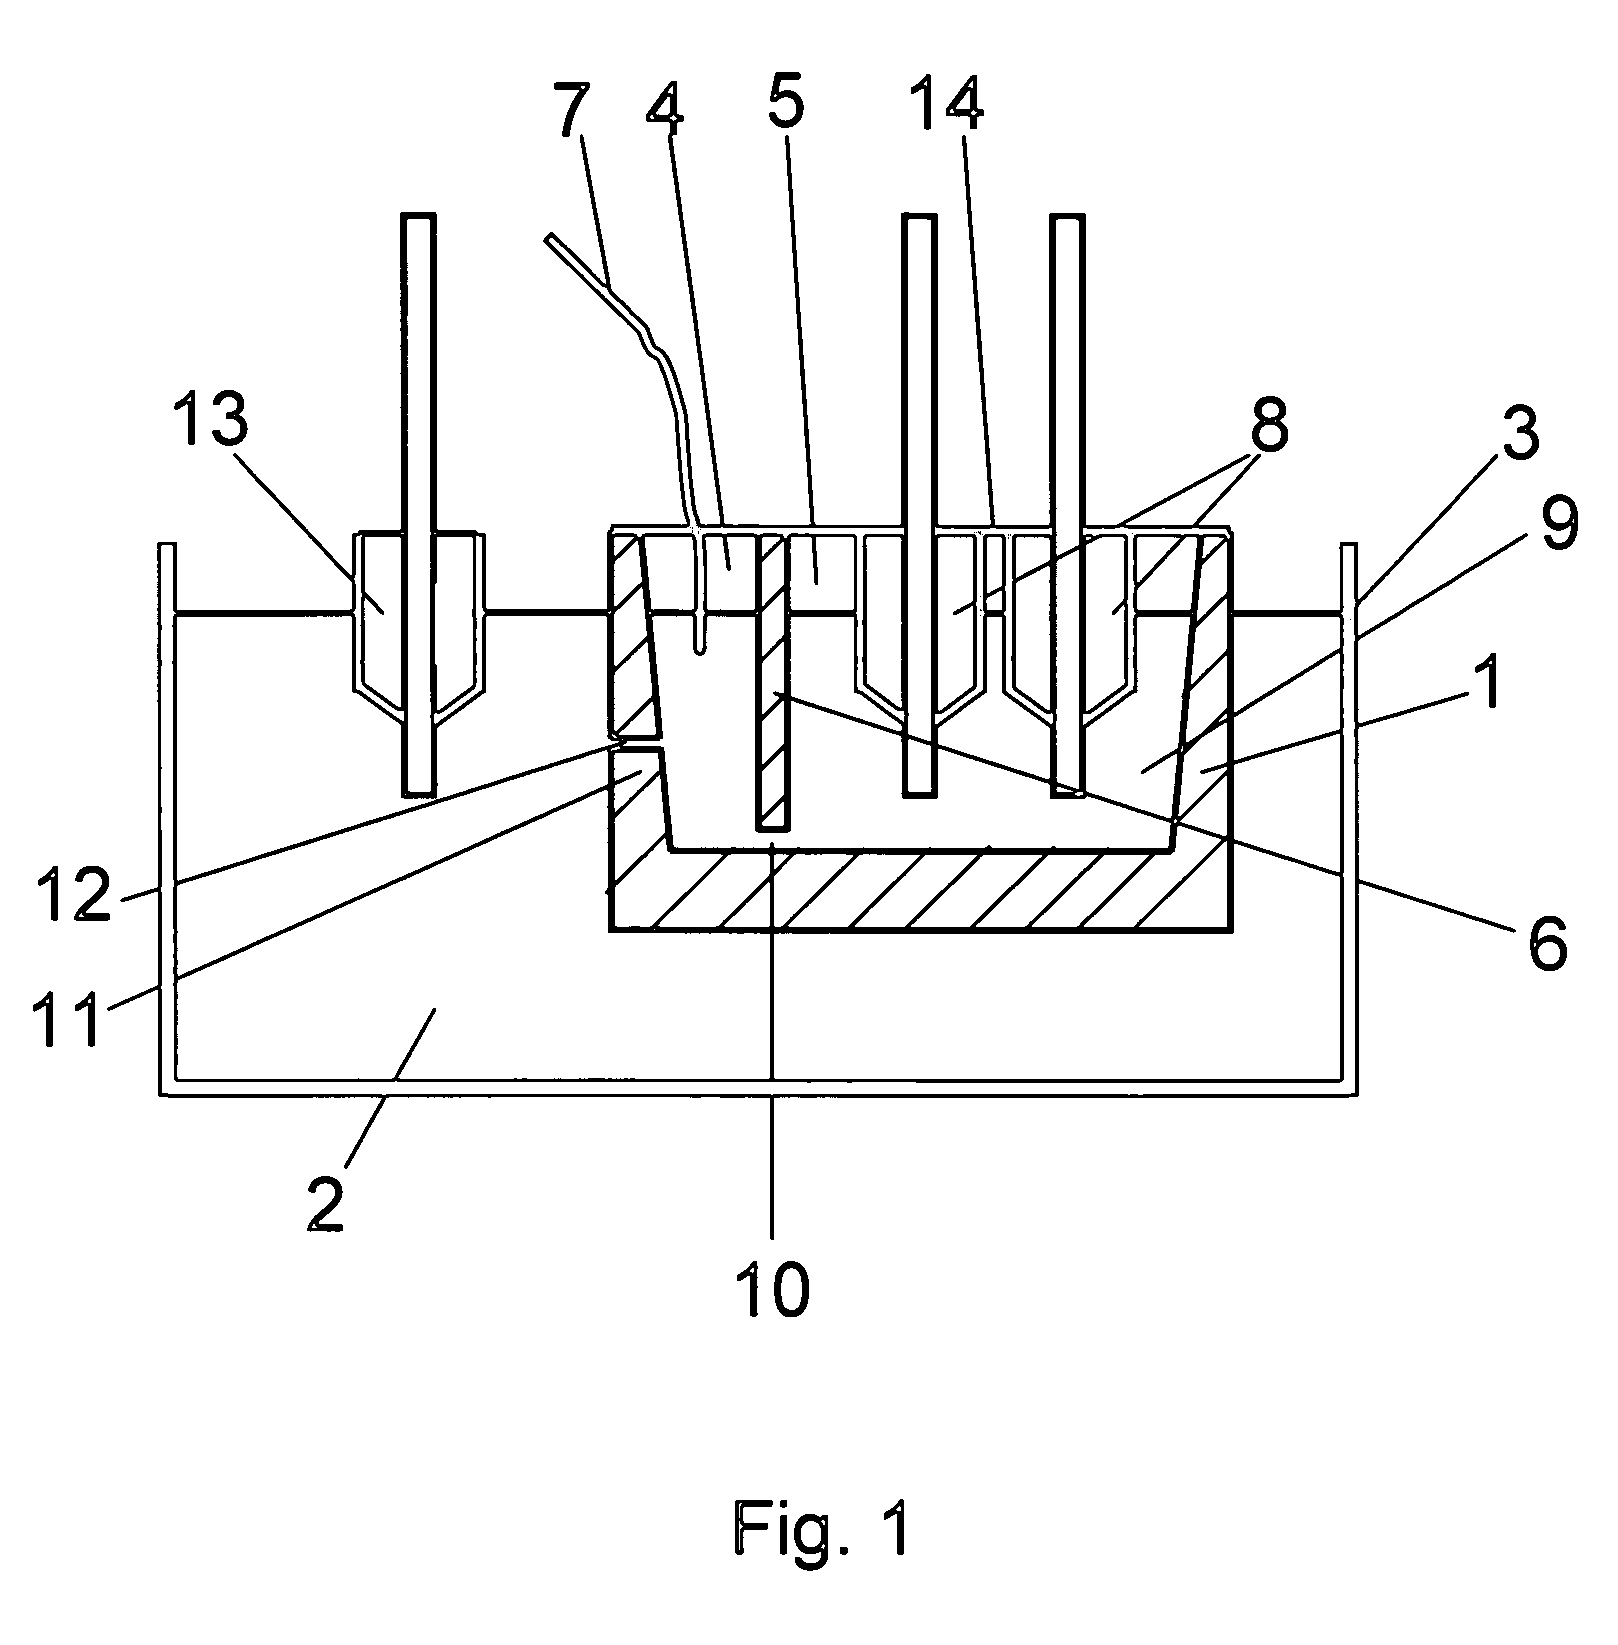 Method and system for casting metal and metal alloys